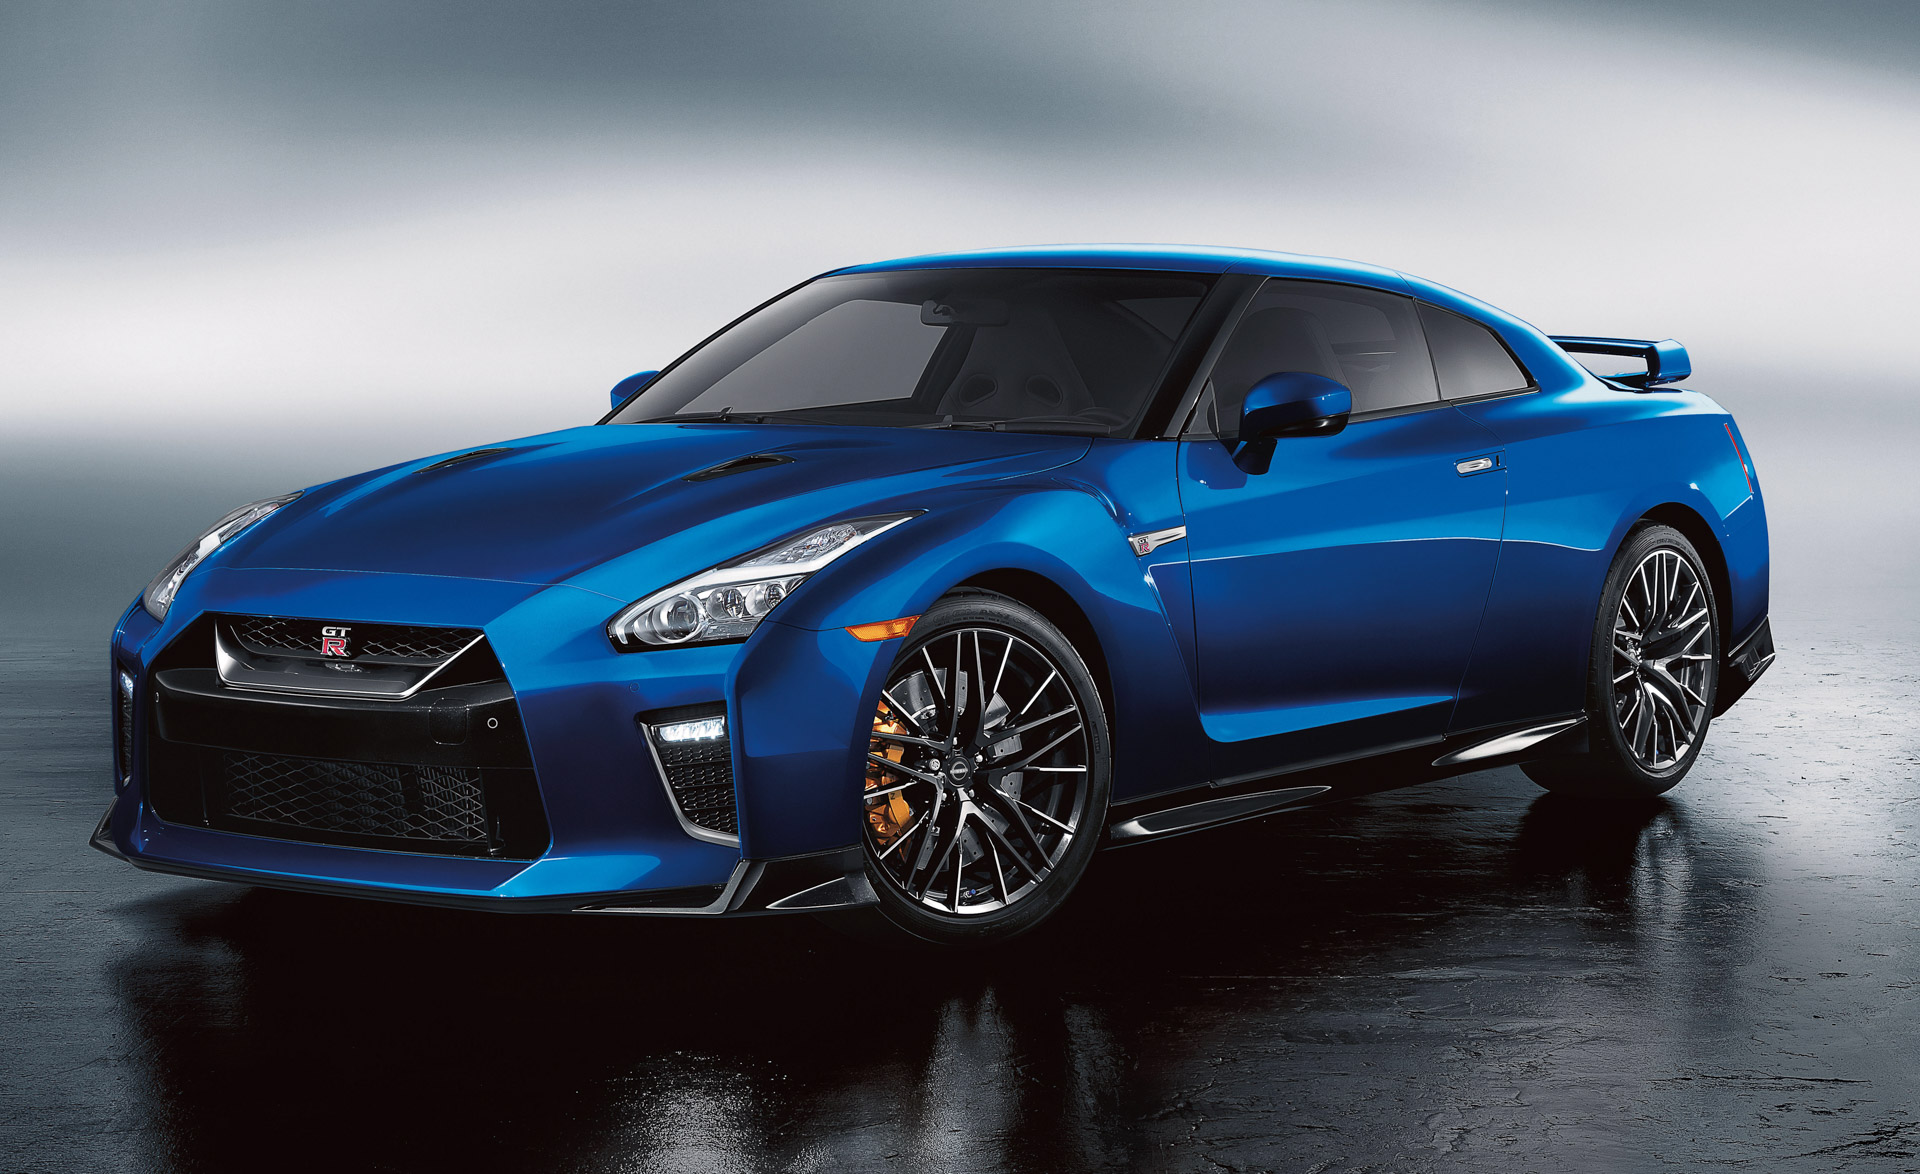 This is the new 2024 Nissan GT-R